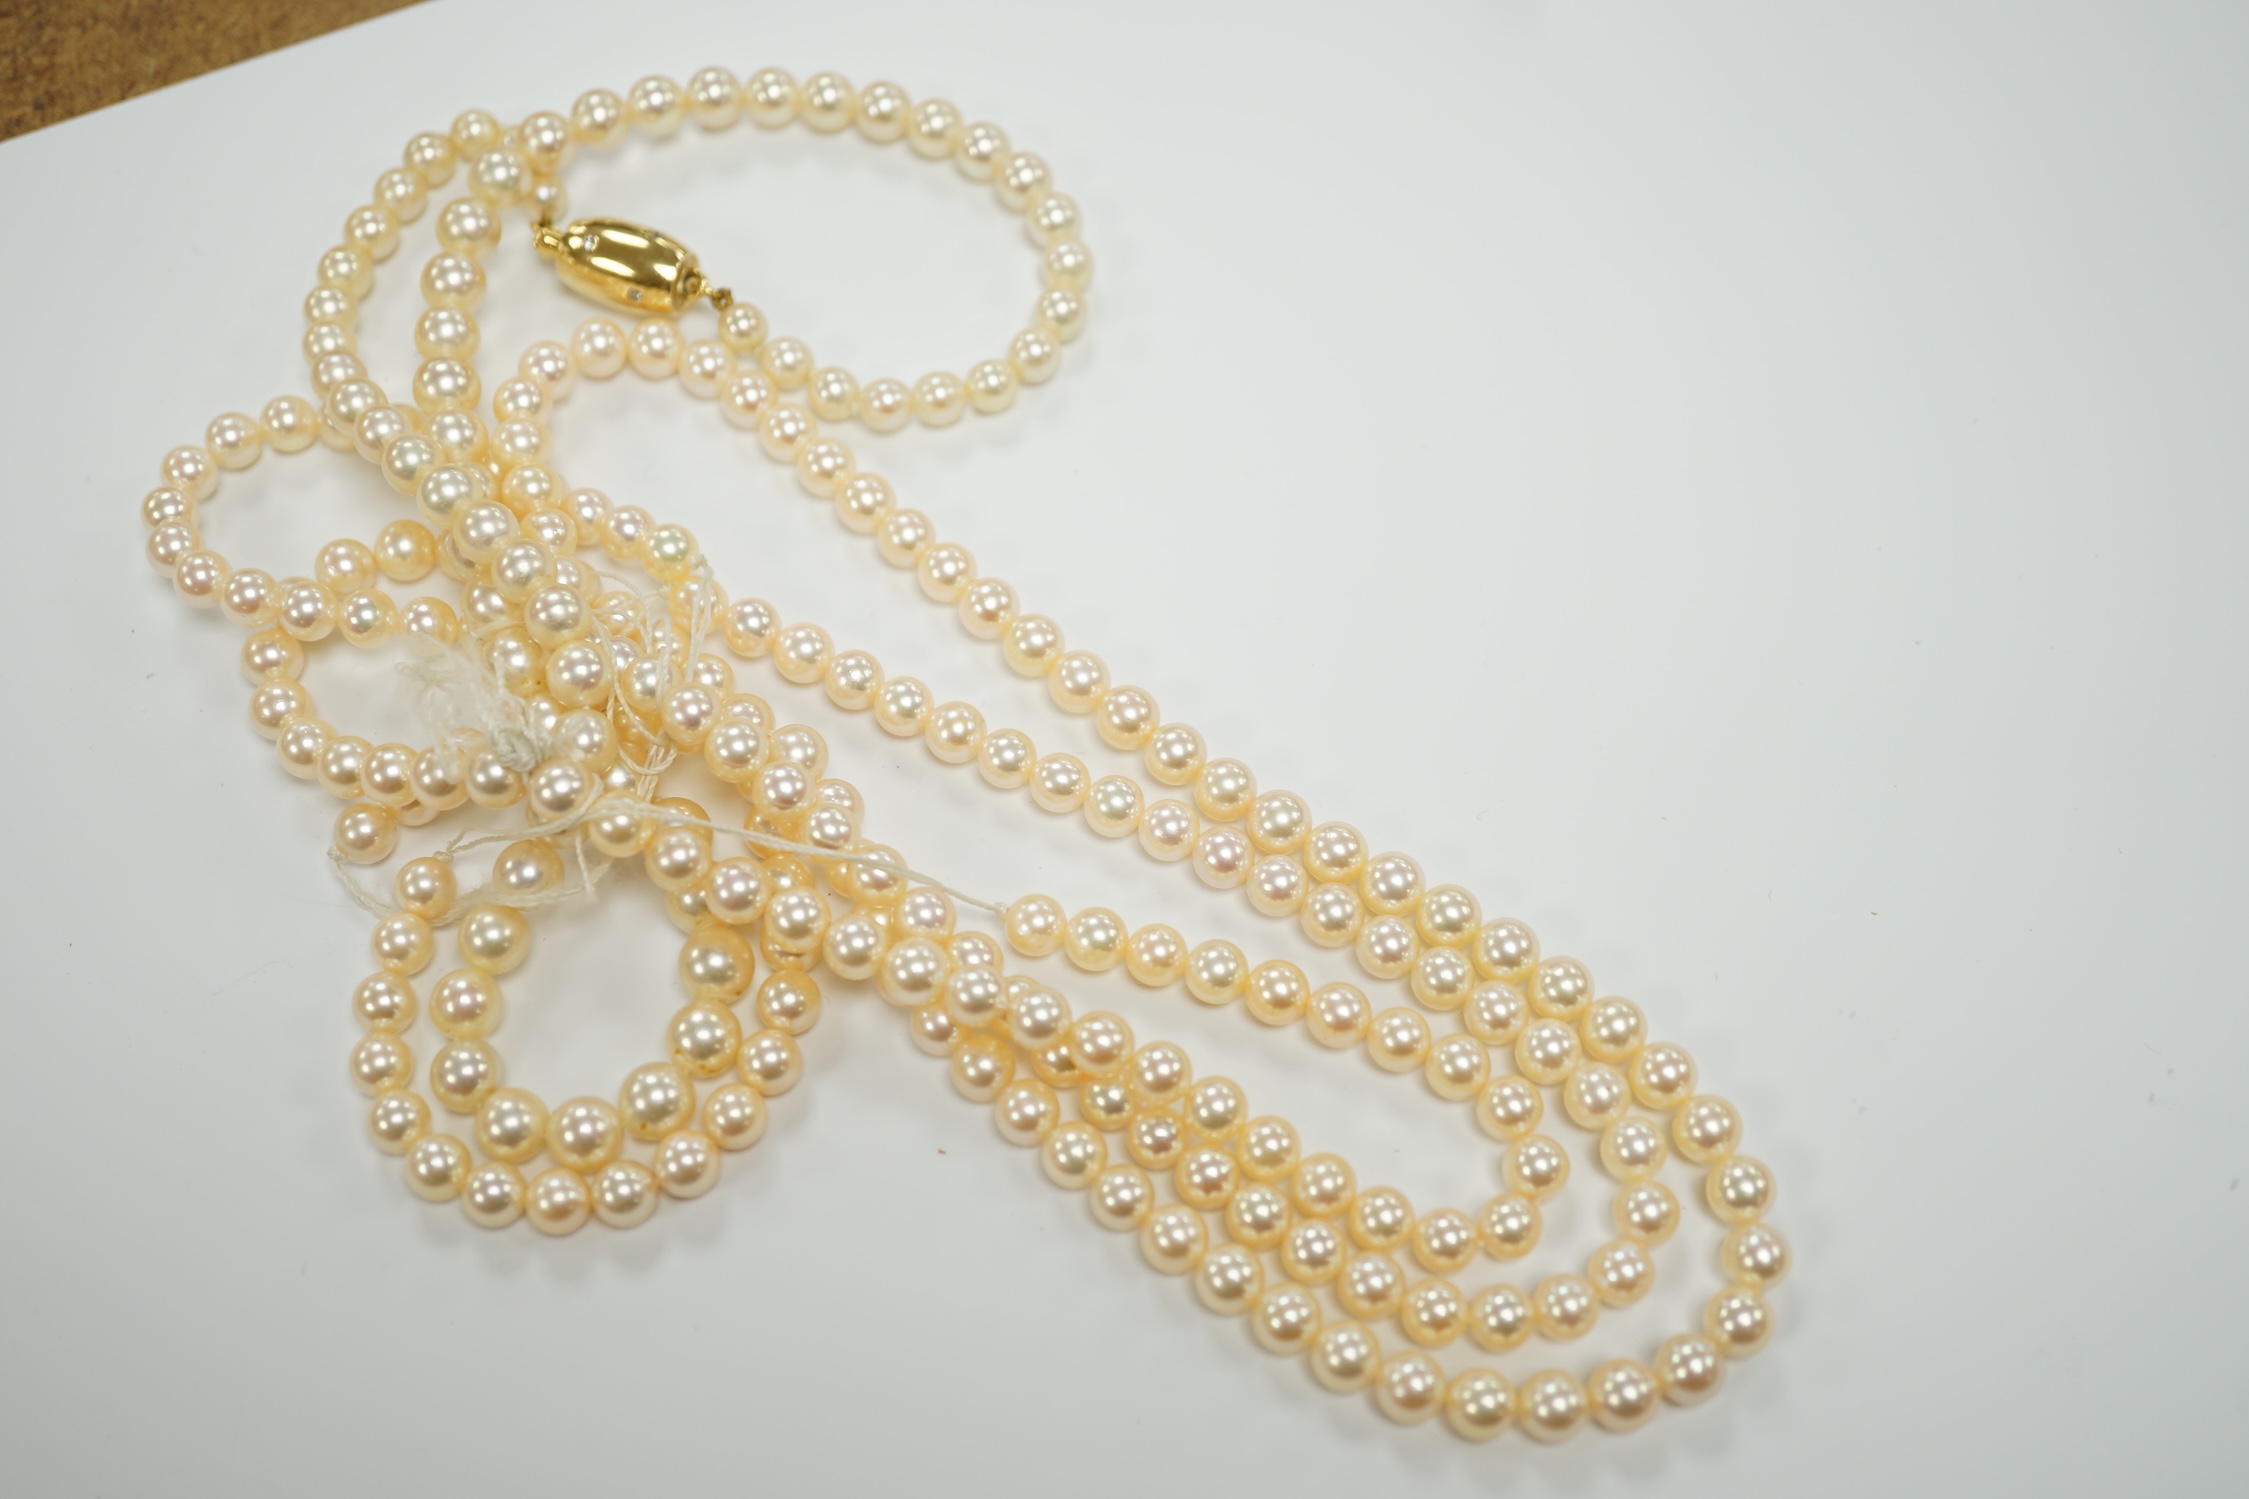 A single? strand cultured pearl necklace, with diamond inset barrel shaped yellow metal clasp (knotted).